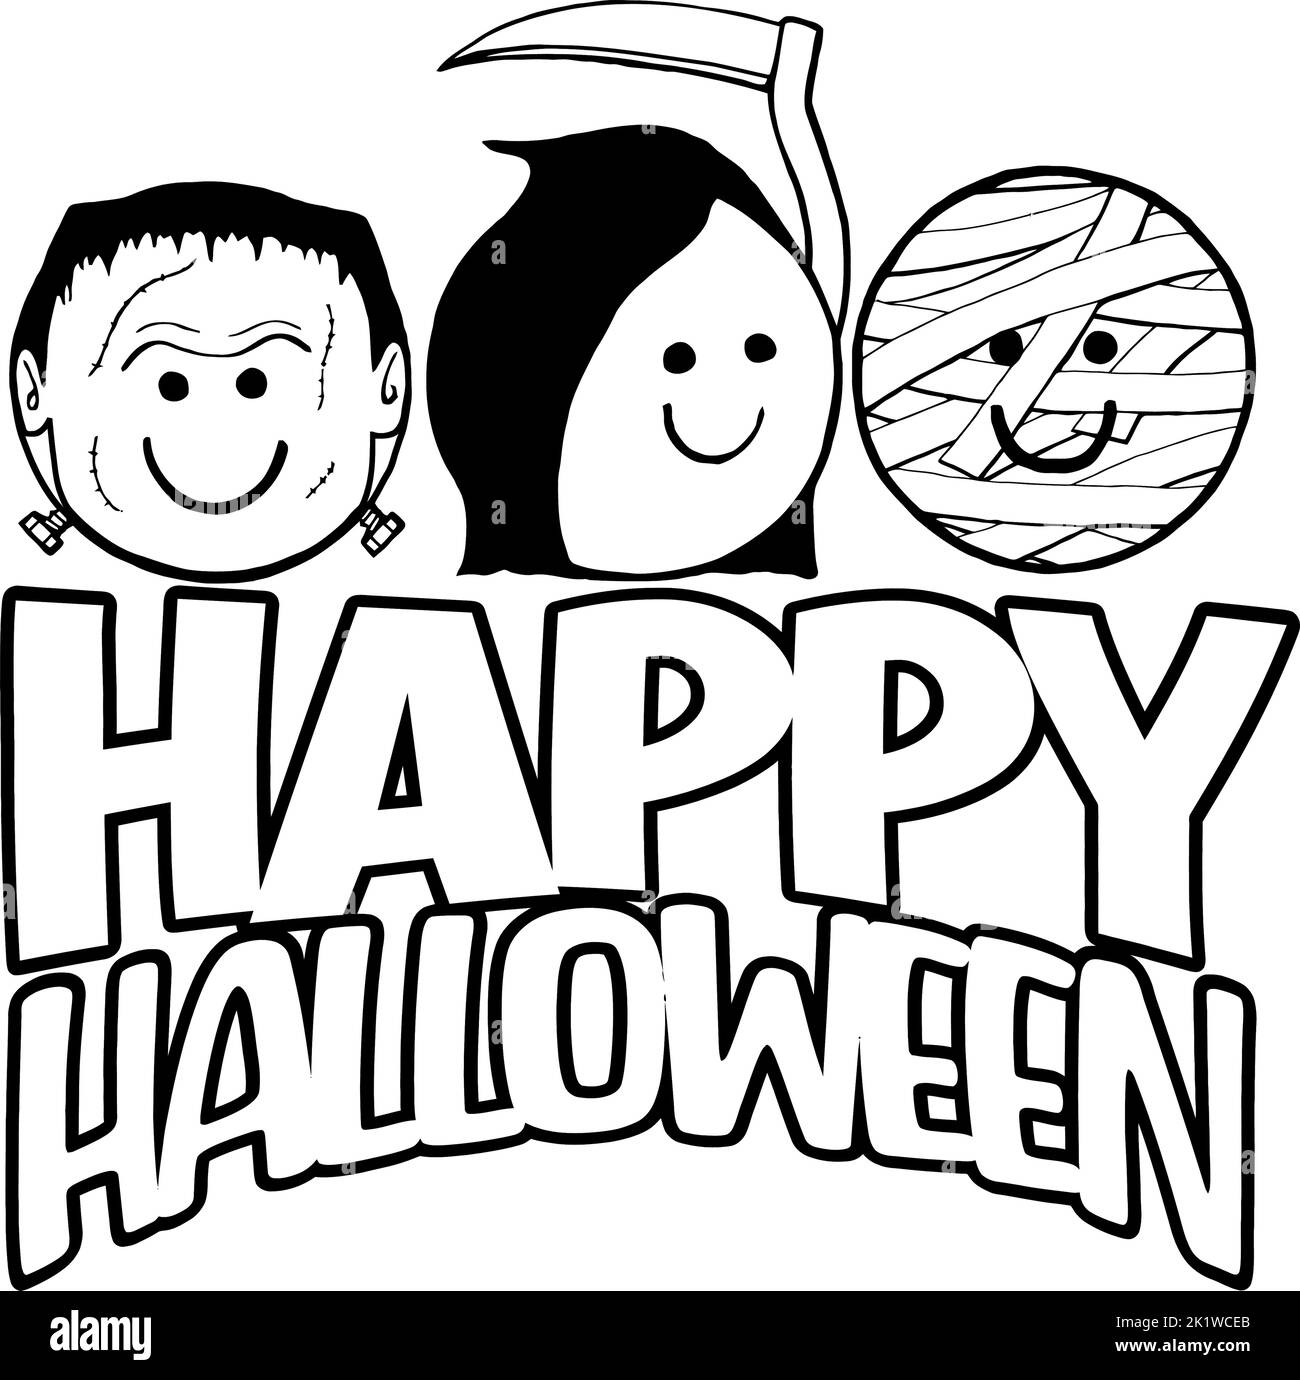 happy halloween with smiley face monsters Stock Vector